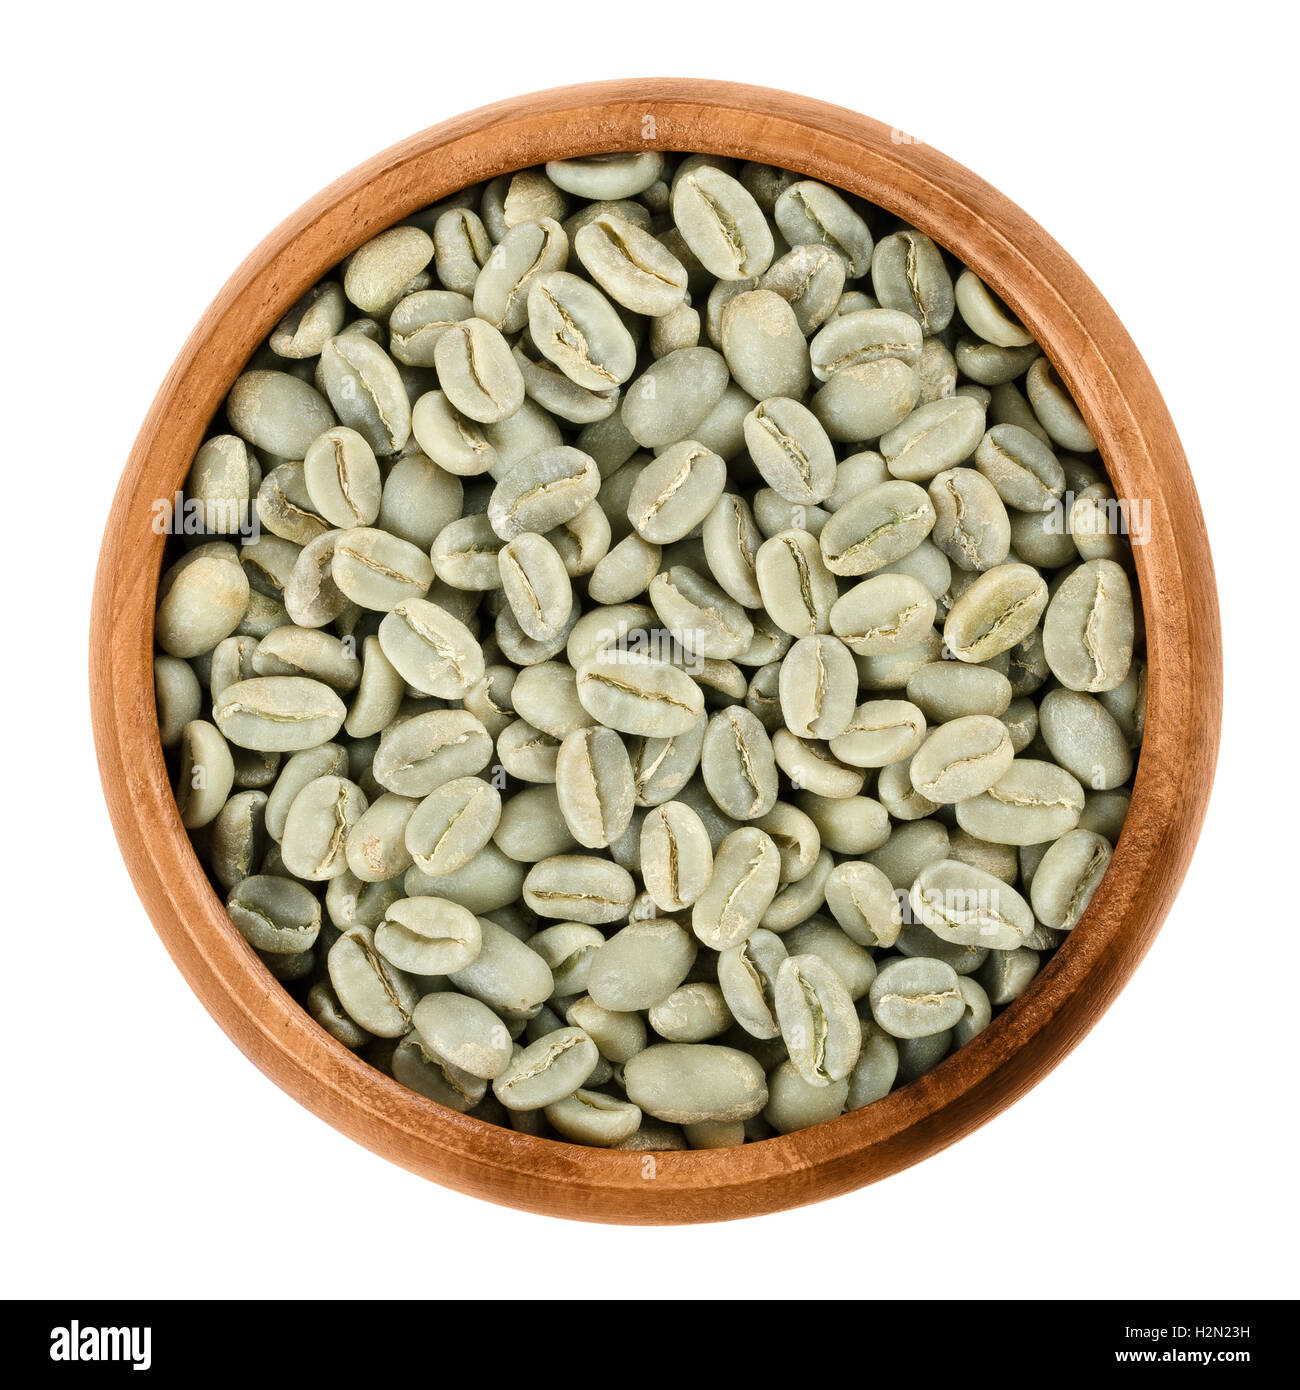 Green Arabica coffee beans in a wooden bowl on white background. Unroasted pits of the coffee cherries. Isolated close up macro. Stock Photo